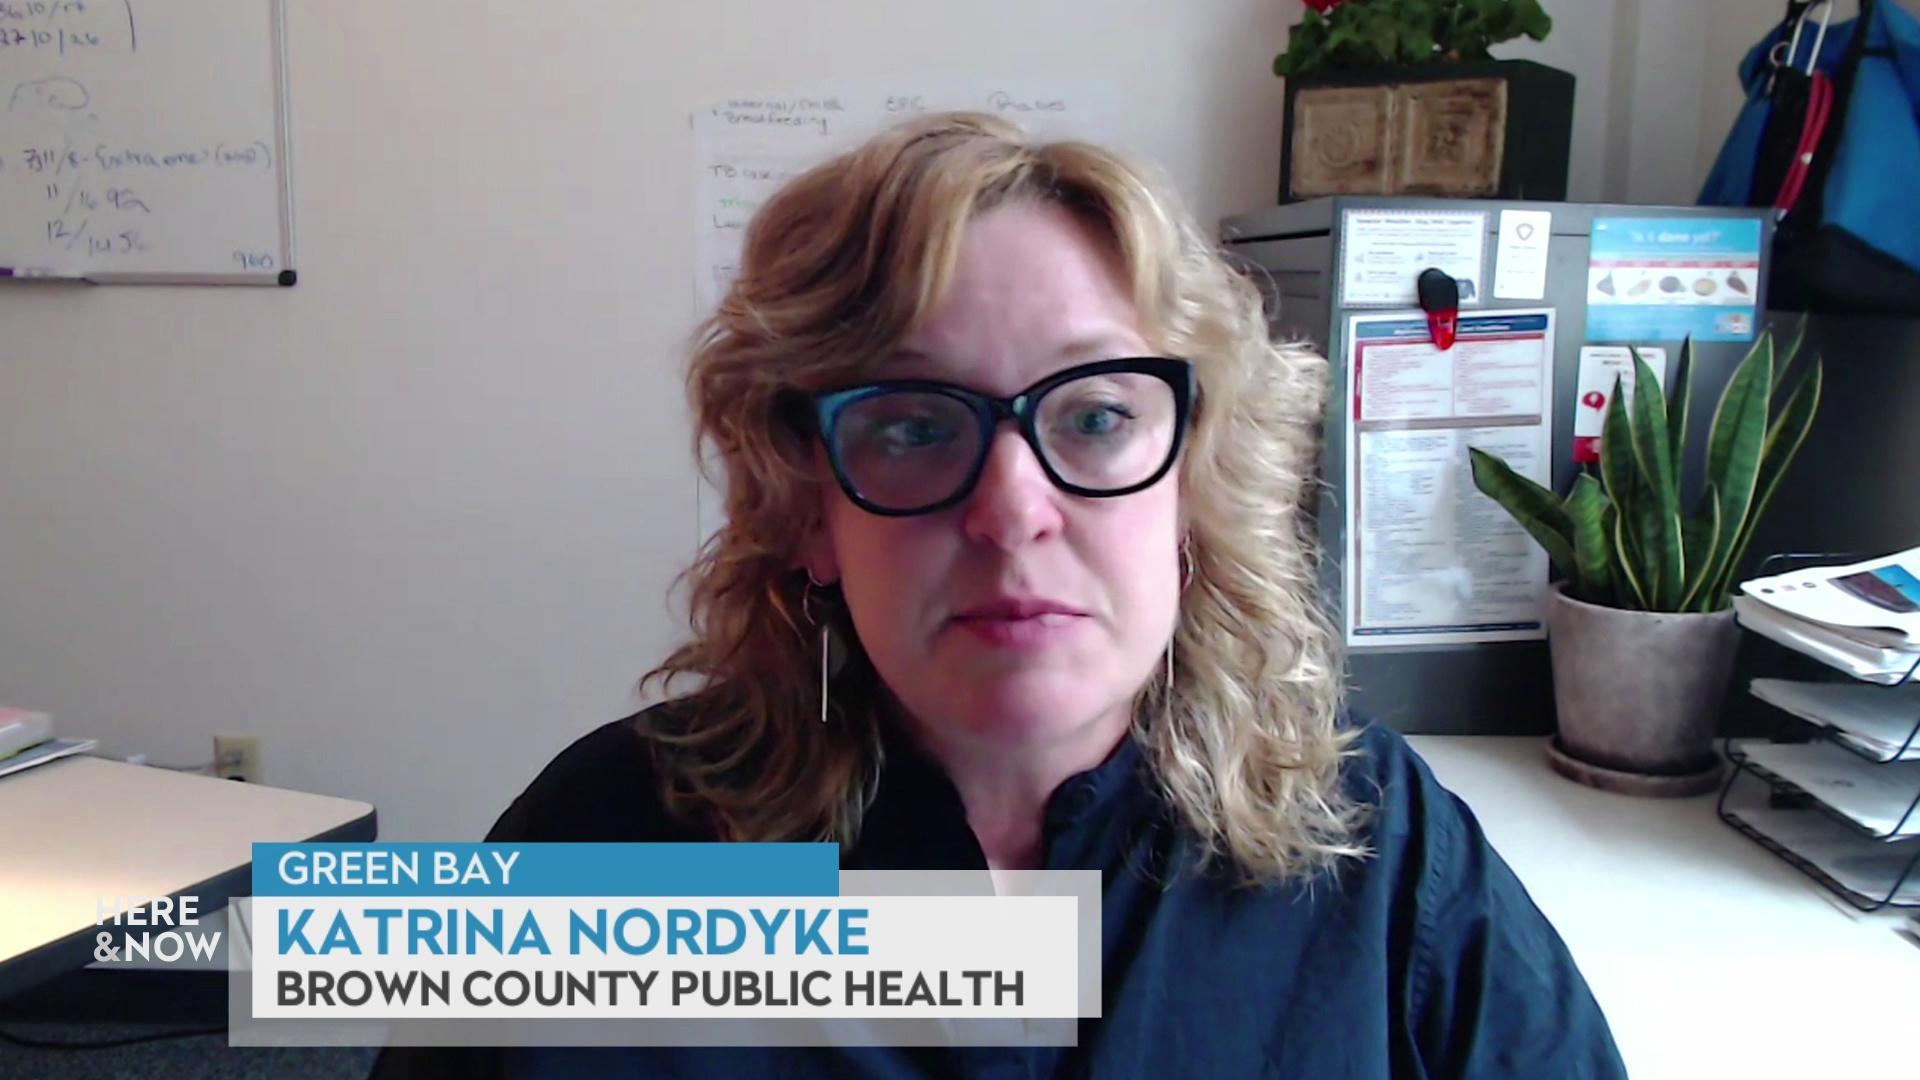 A still image from a video shows Katrina Nordyke standing in front of wall with a potted plant to her right, with a graphic at bottom reading 'Green Bay,' 'Katrina Nordyke,' and 'Brown county Public Health.'